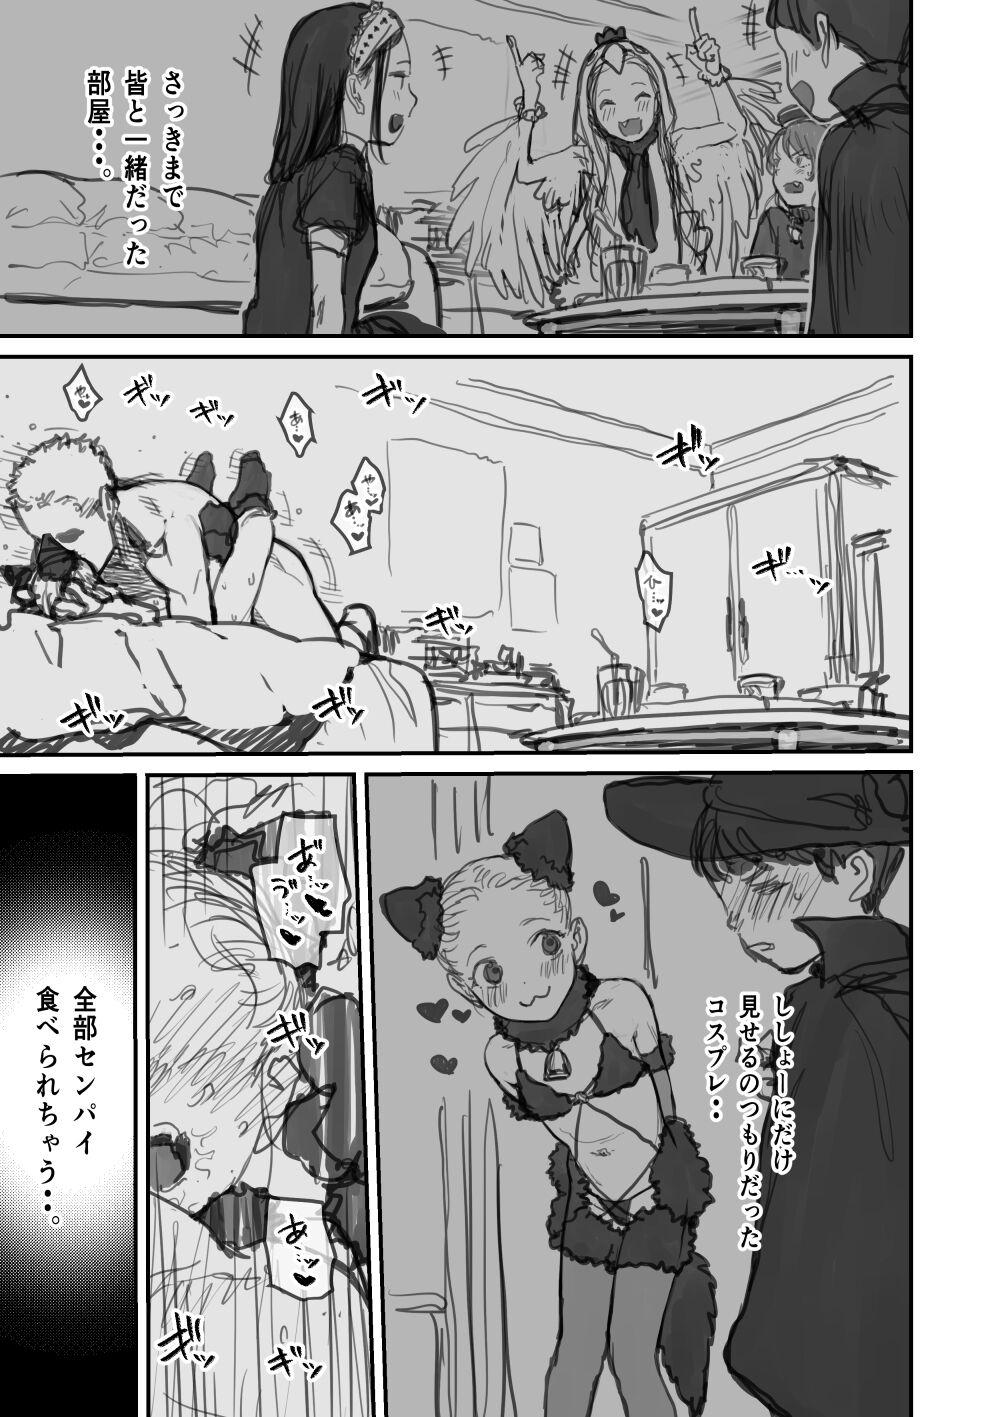 Firsttime 【?IFルート?】IFIFIFIFIFIFIF【?IFルート?】 Negao - Page 3